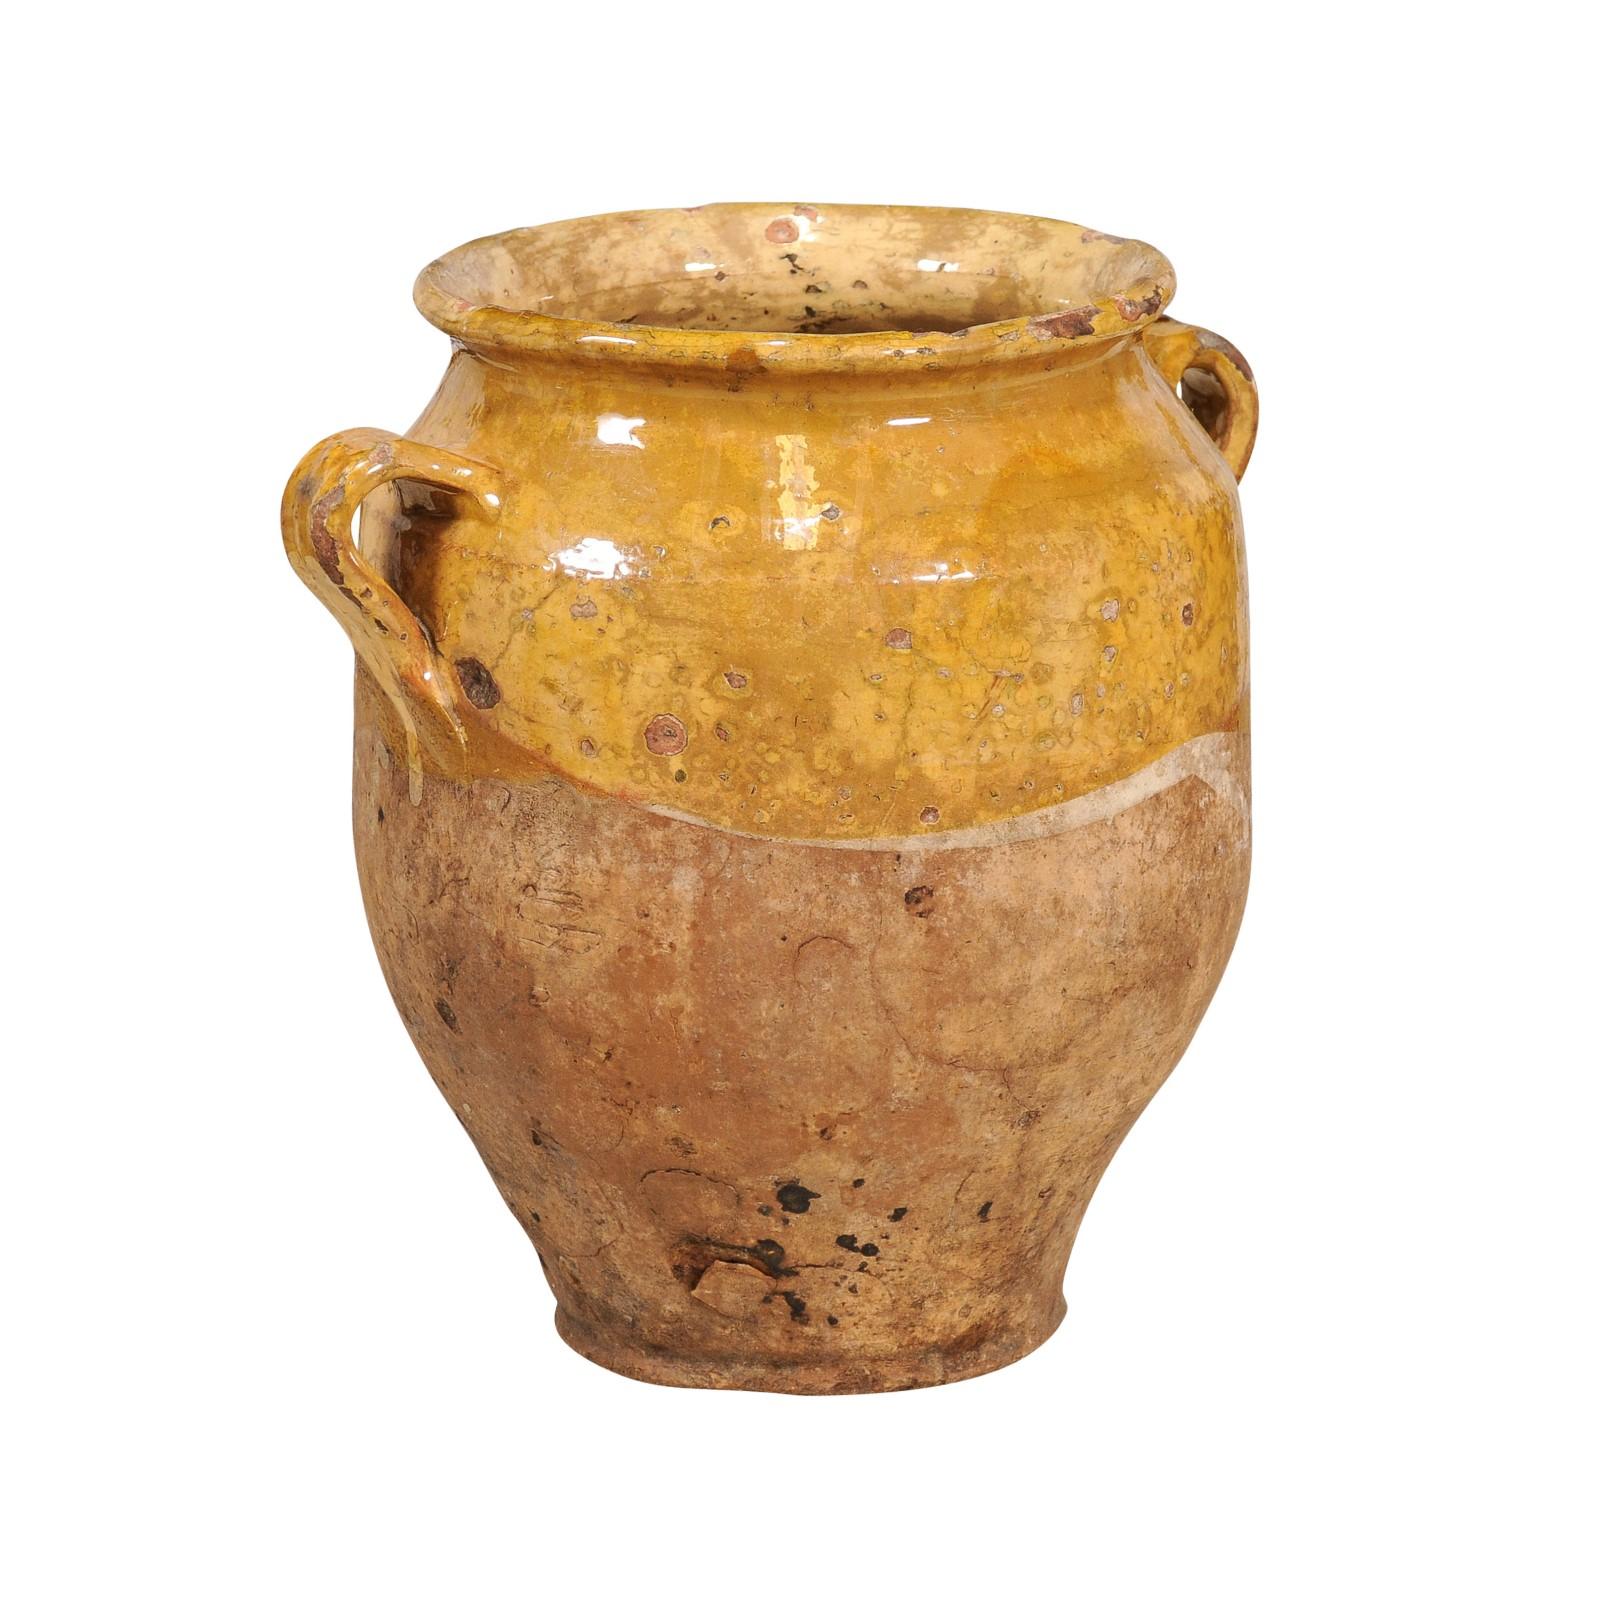 A French Provincial pot à confit pottery from the 20th century with yellow glaze, two lateral handles and rustic patina. Delve into the rustic charm and timeless beauty of this French Provincial pot à confit from the 20th century, a delightful